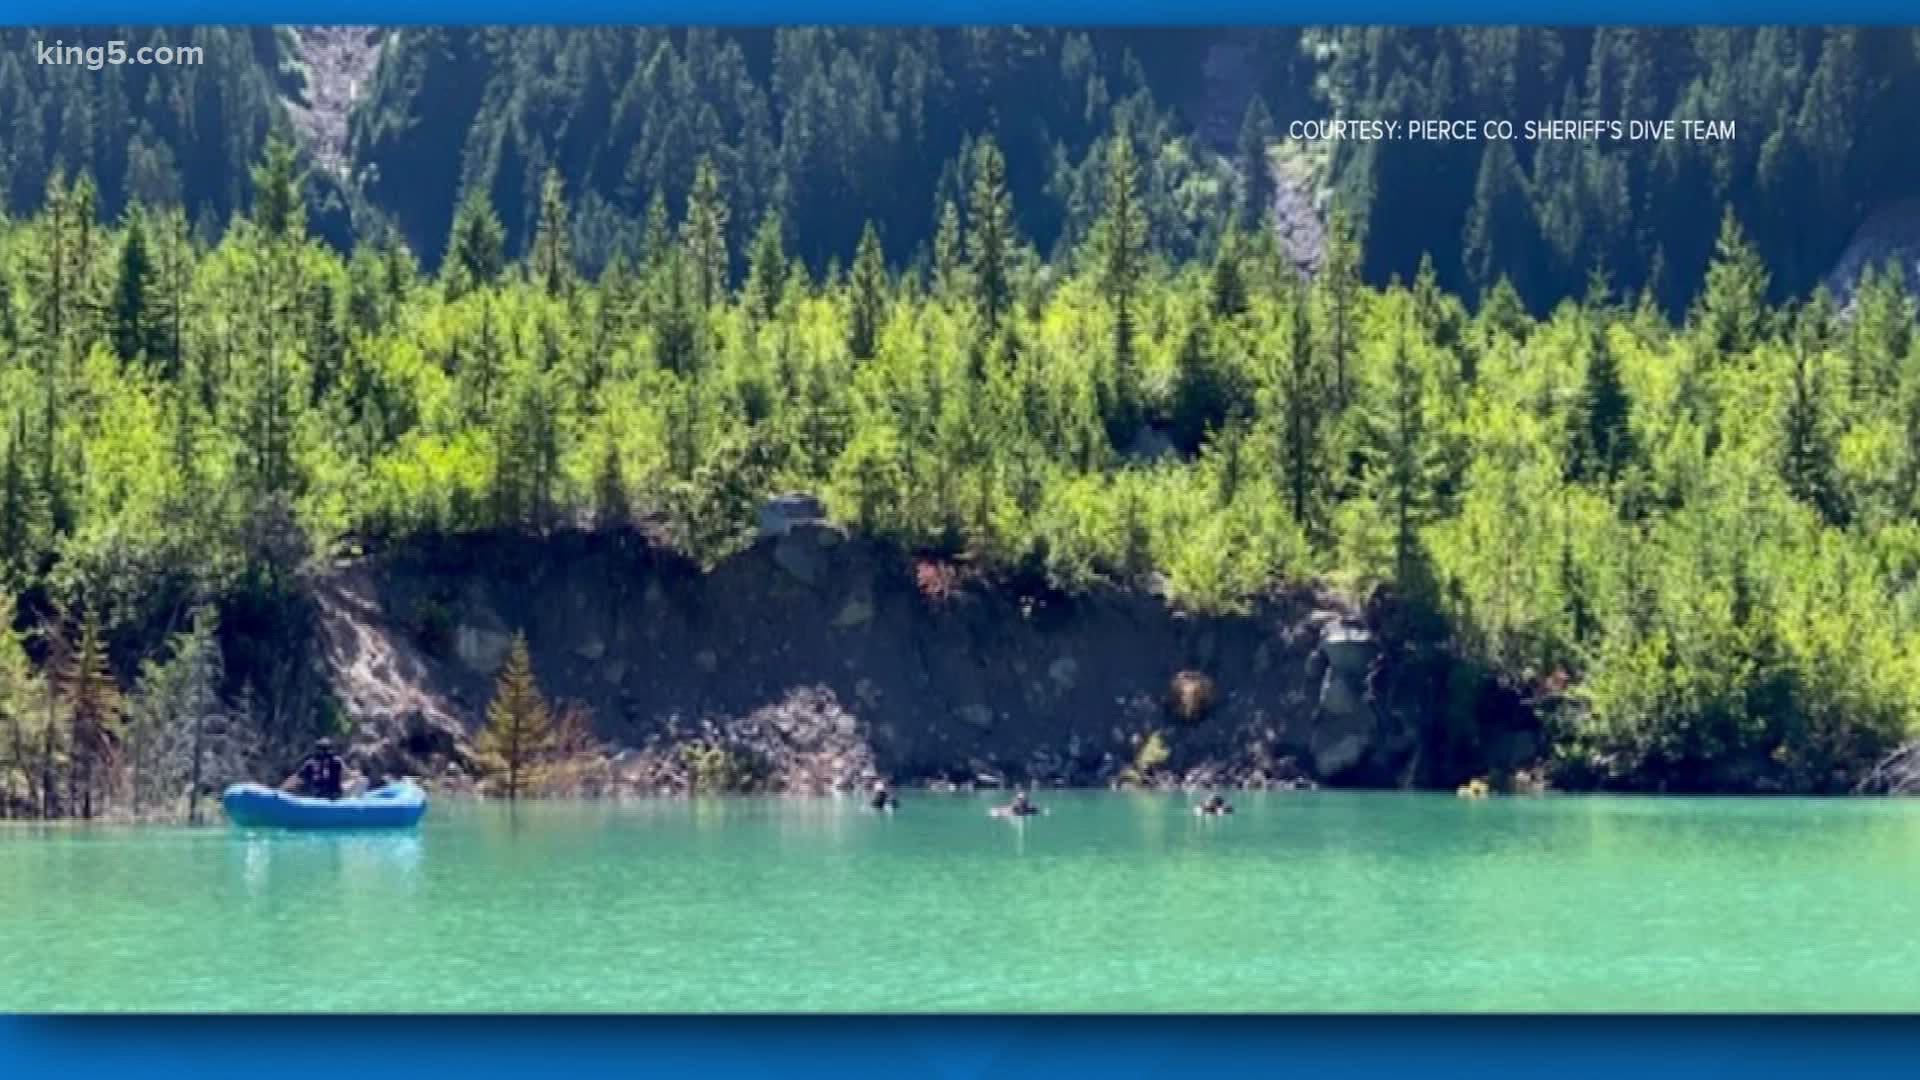 The Pierce County Sheriff’s Dive Team recovered a 23-year-old man from a lake below Emmons Glacier near White River Campground in Mount Rainier National Park.